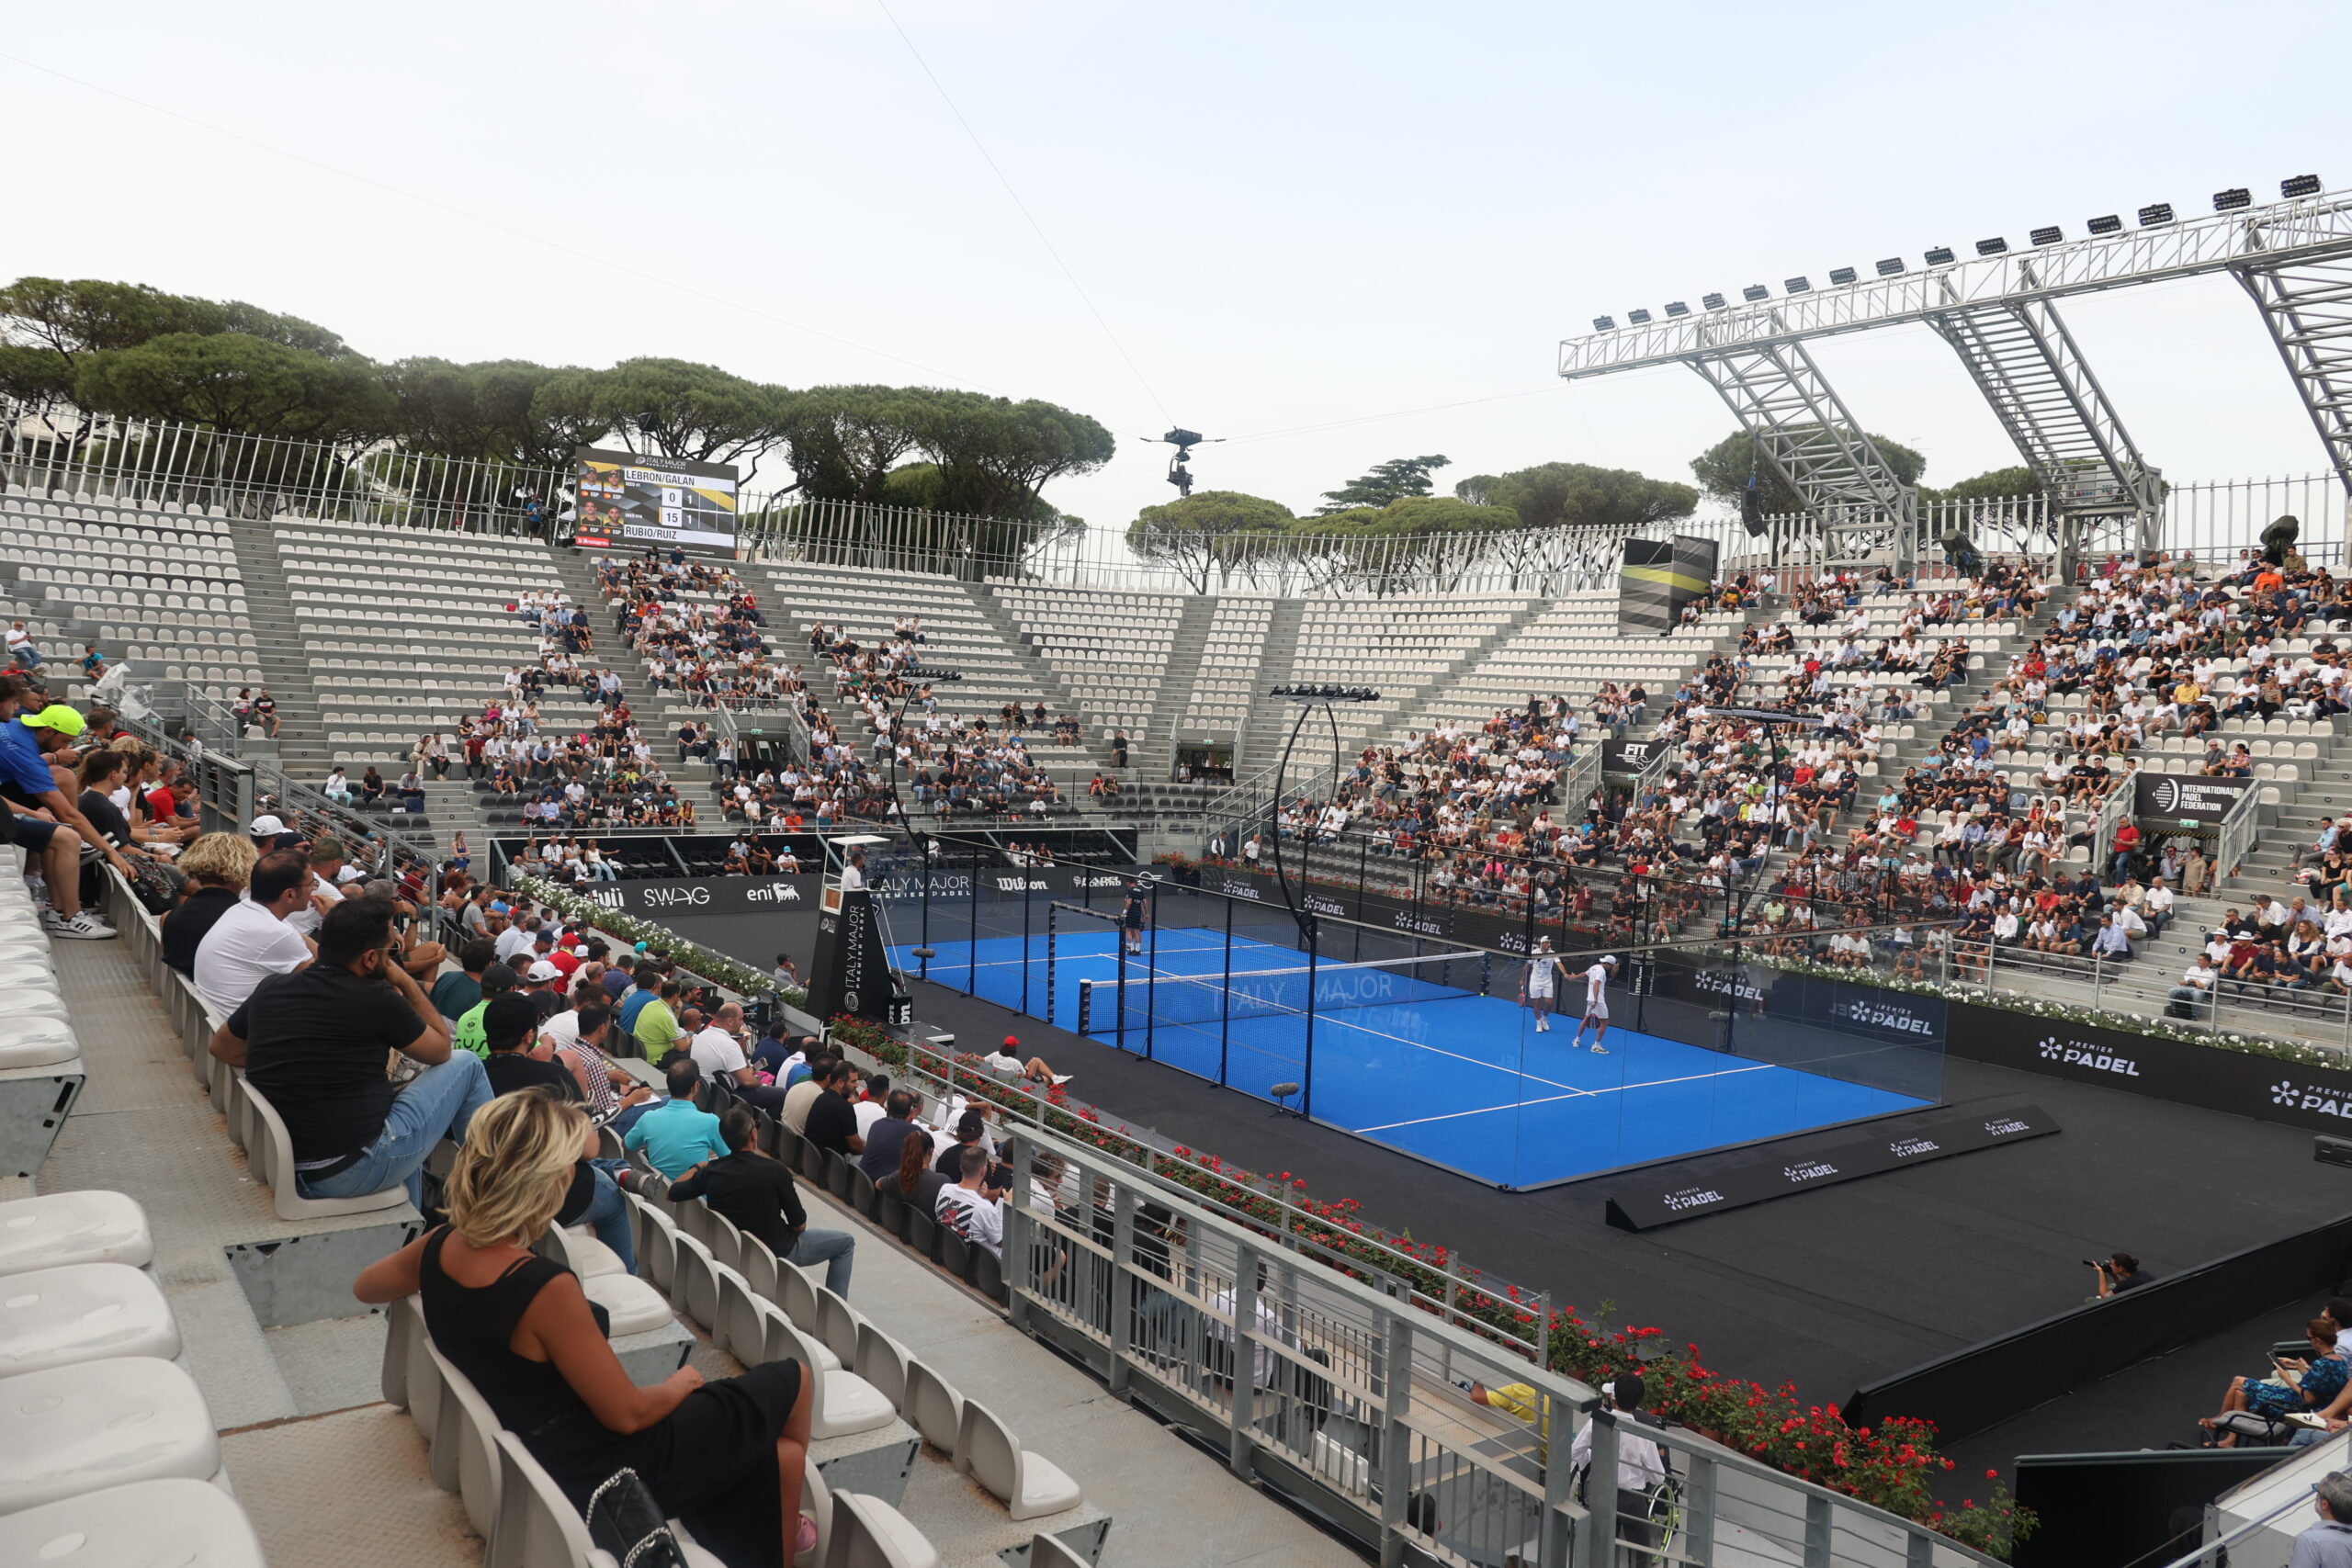 GS Arena (court central) Italy Major Premier Padel